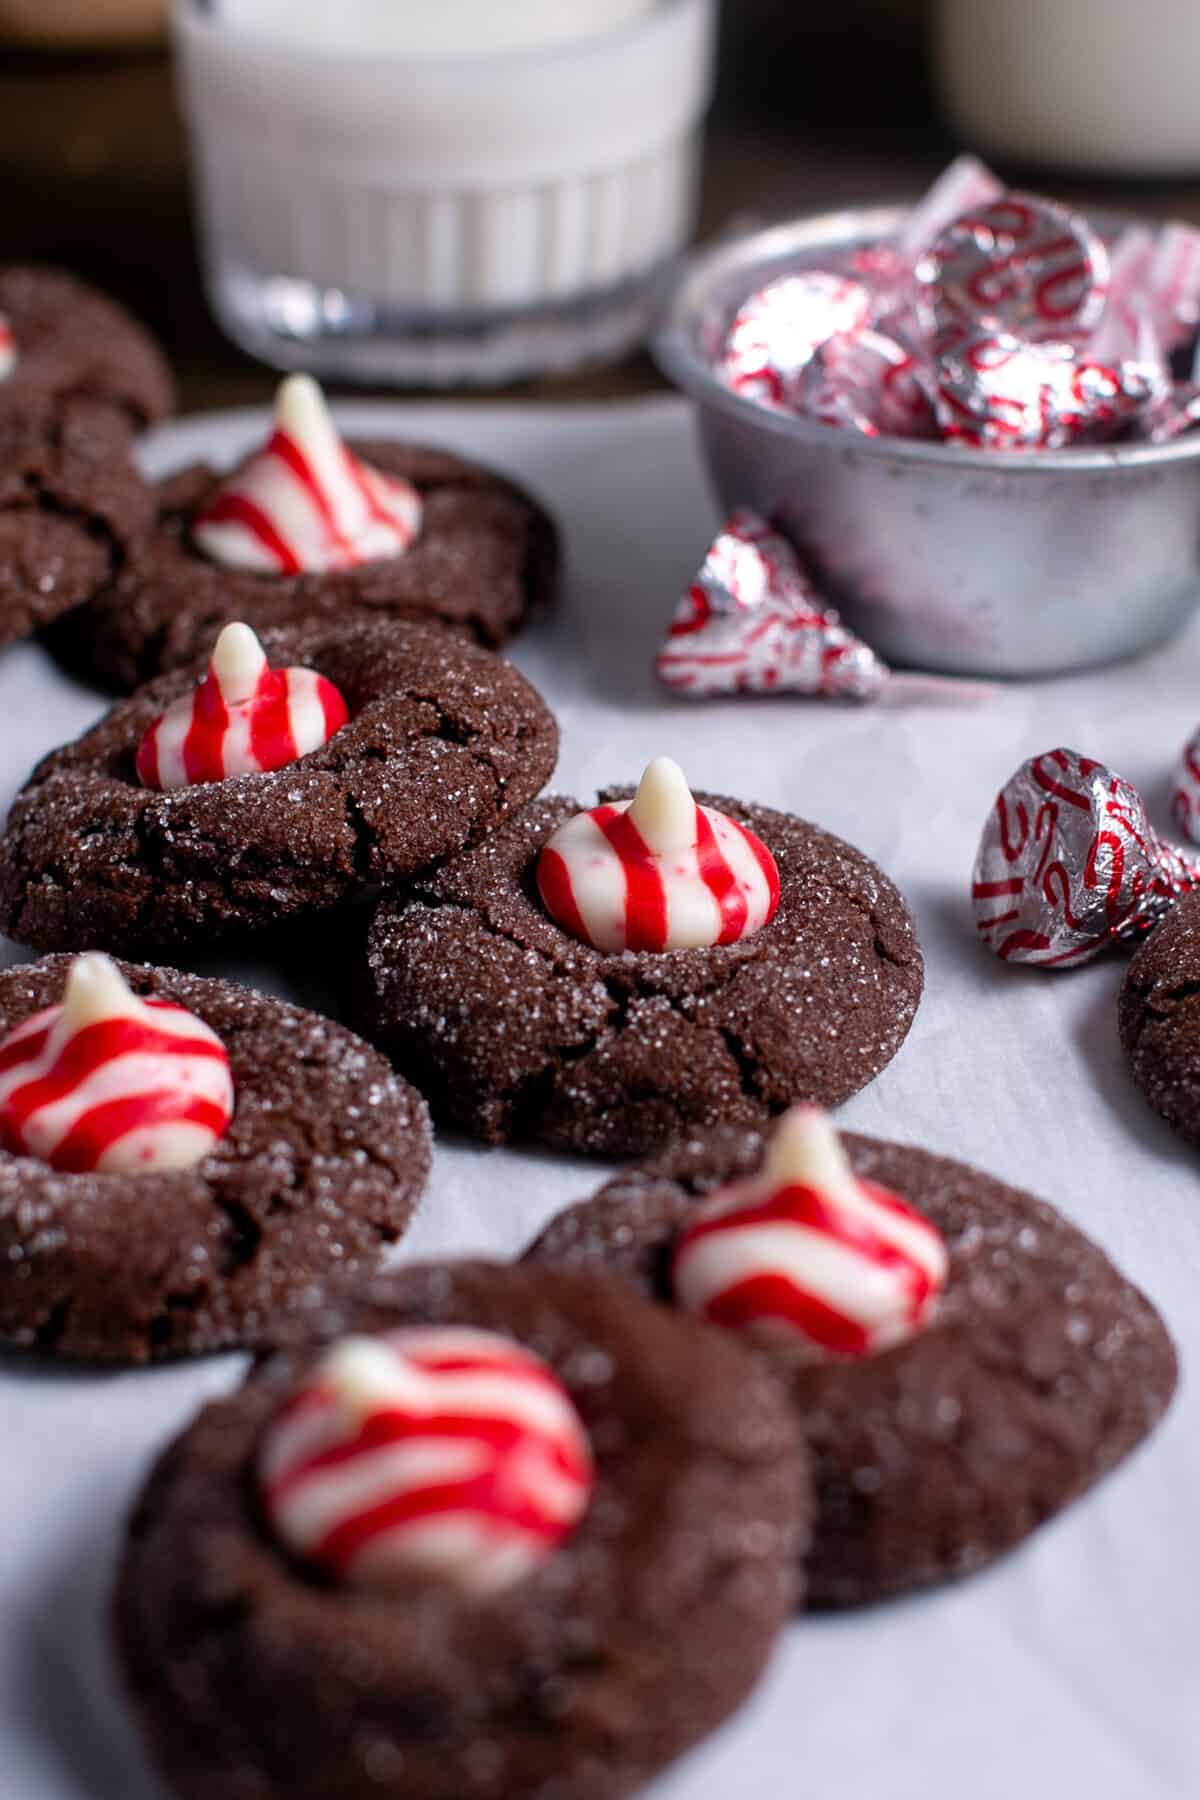 Chocolate Peppermint Blossoms stacked up.